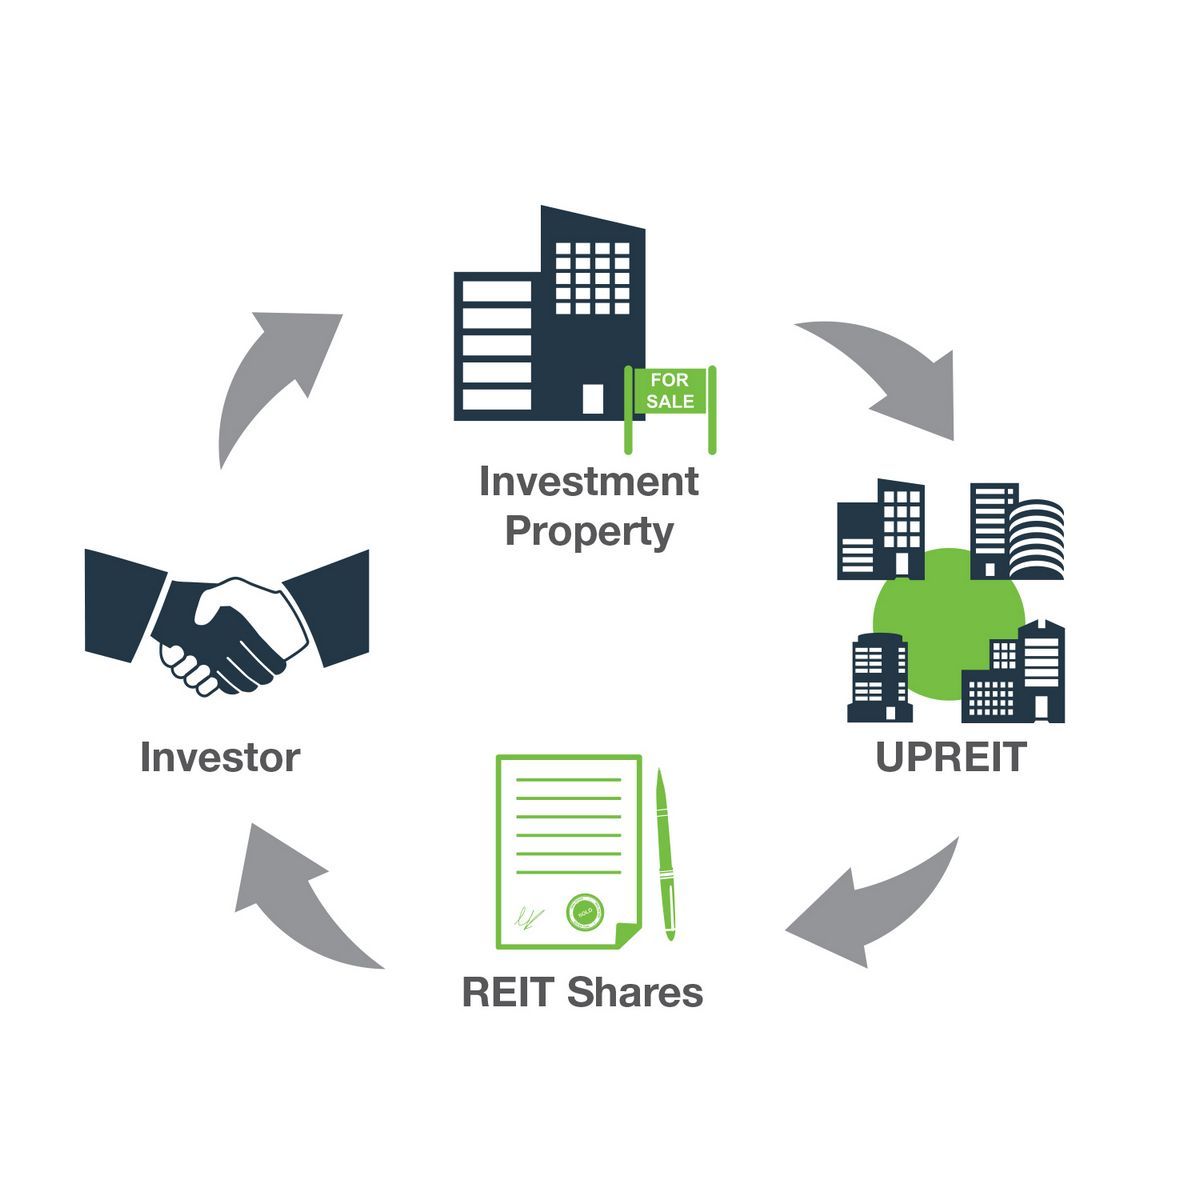 UPREIT Benefits and Qualifications in Real Estate Investing